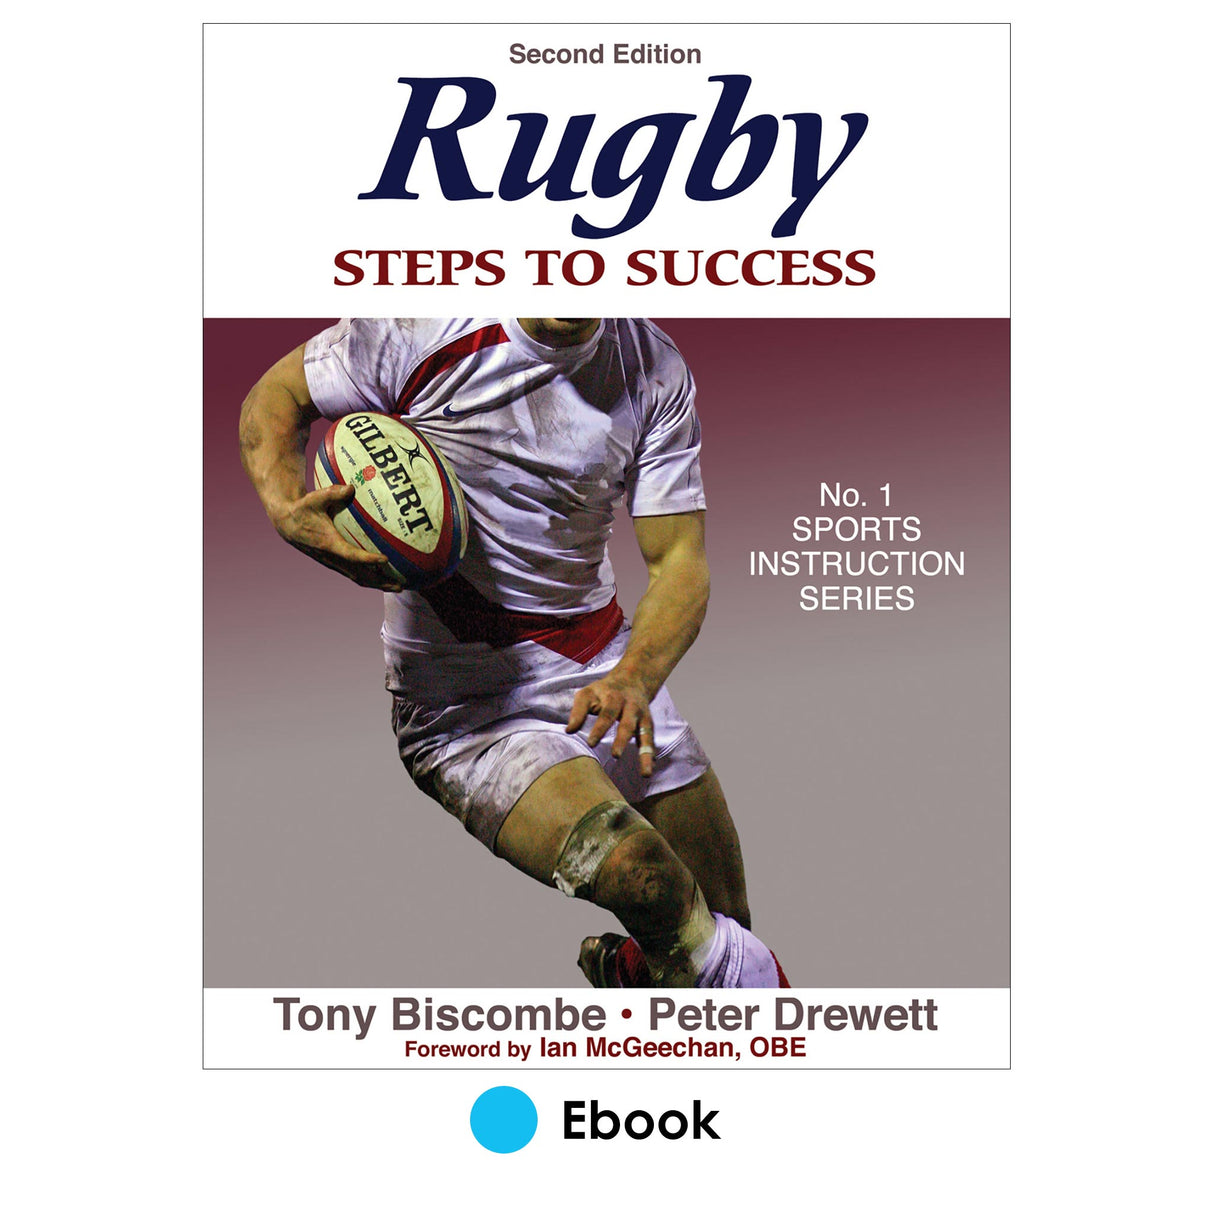 Rugby 2nd Edition PDF